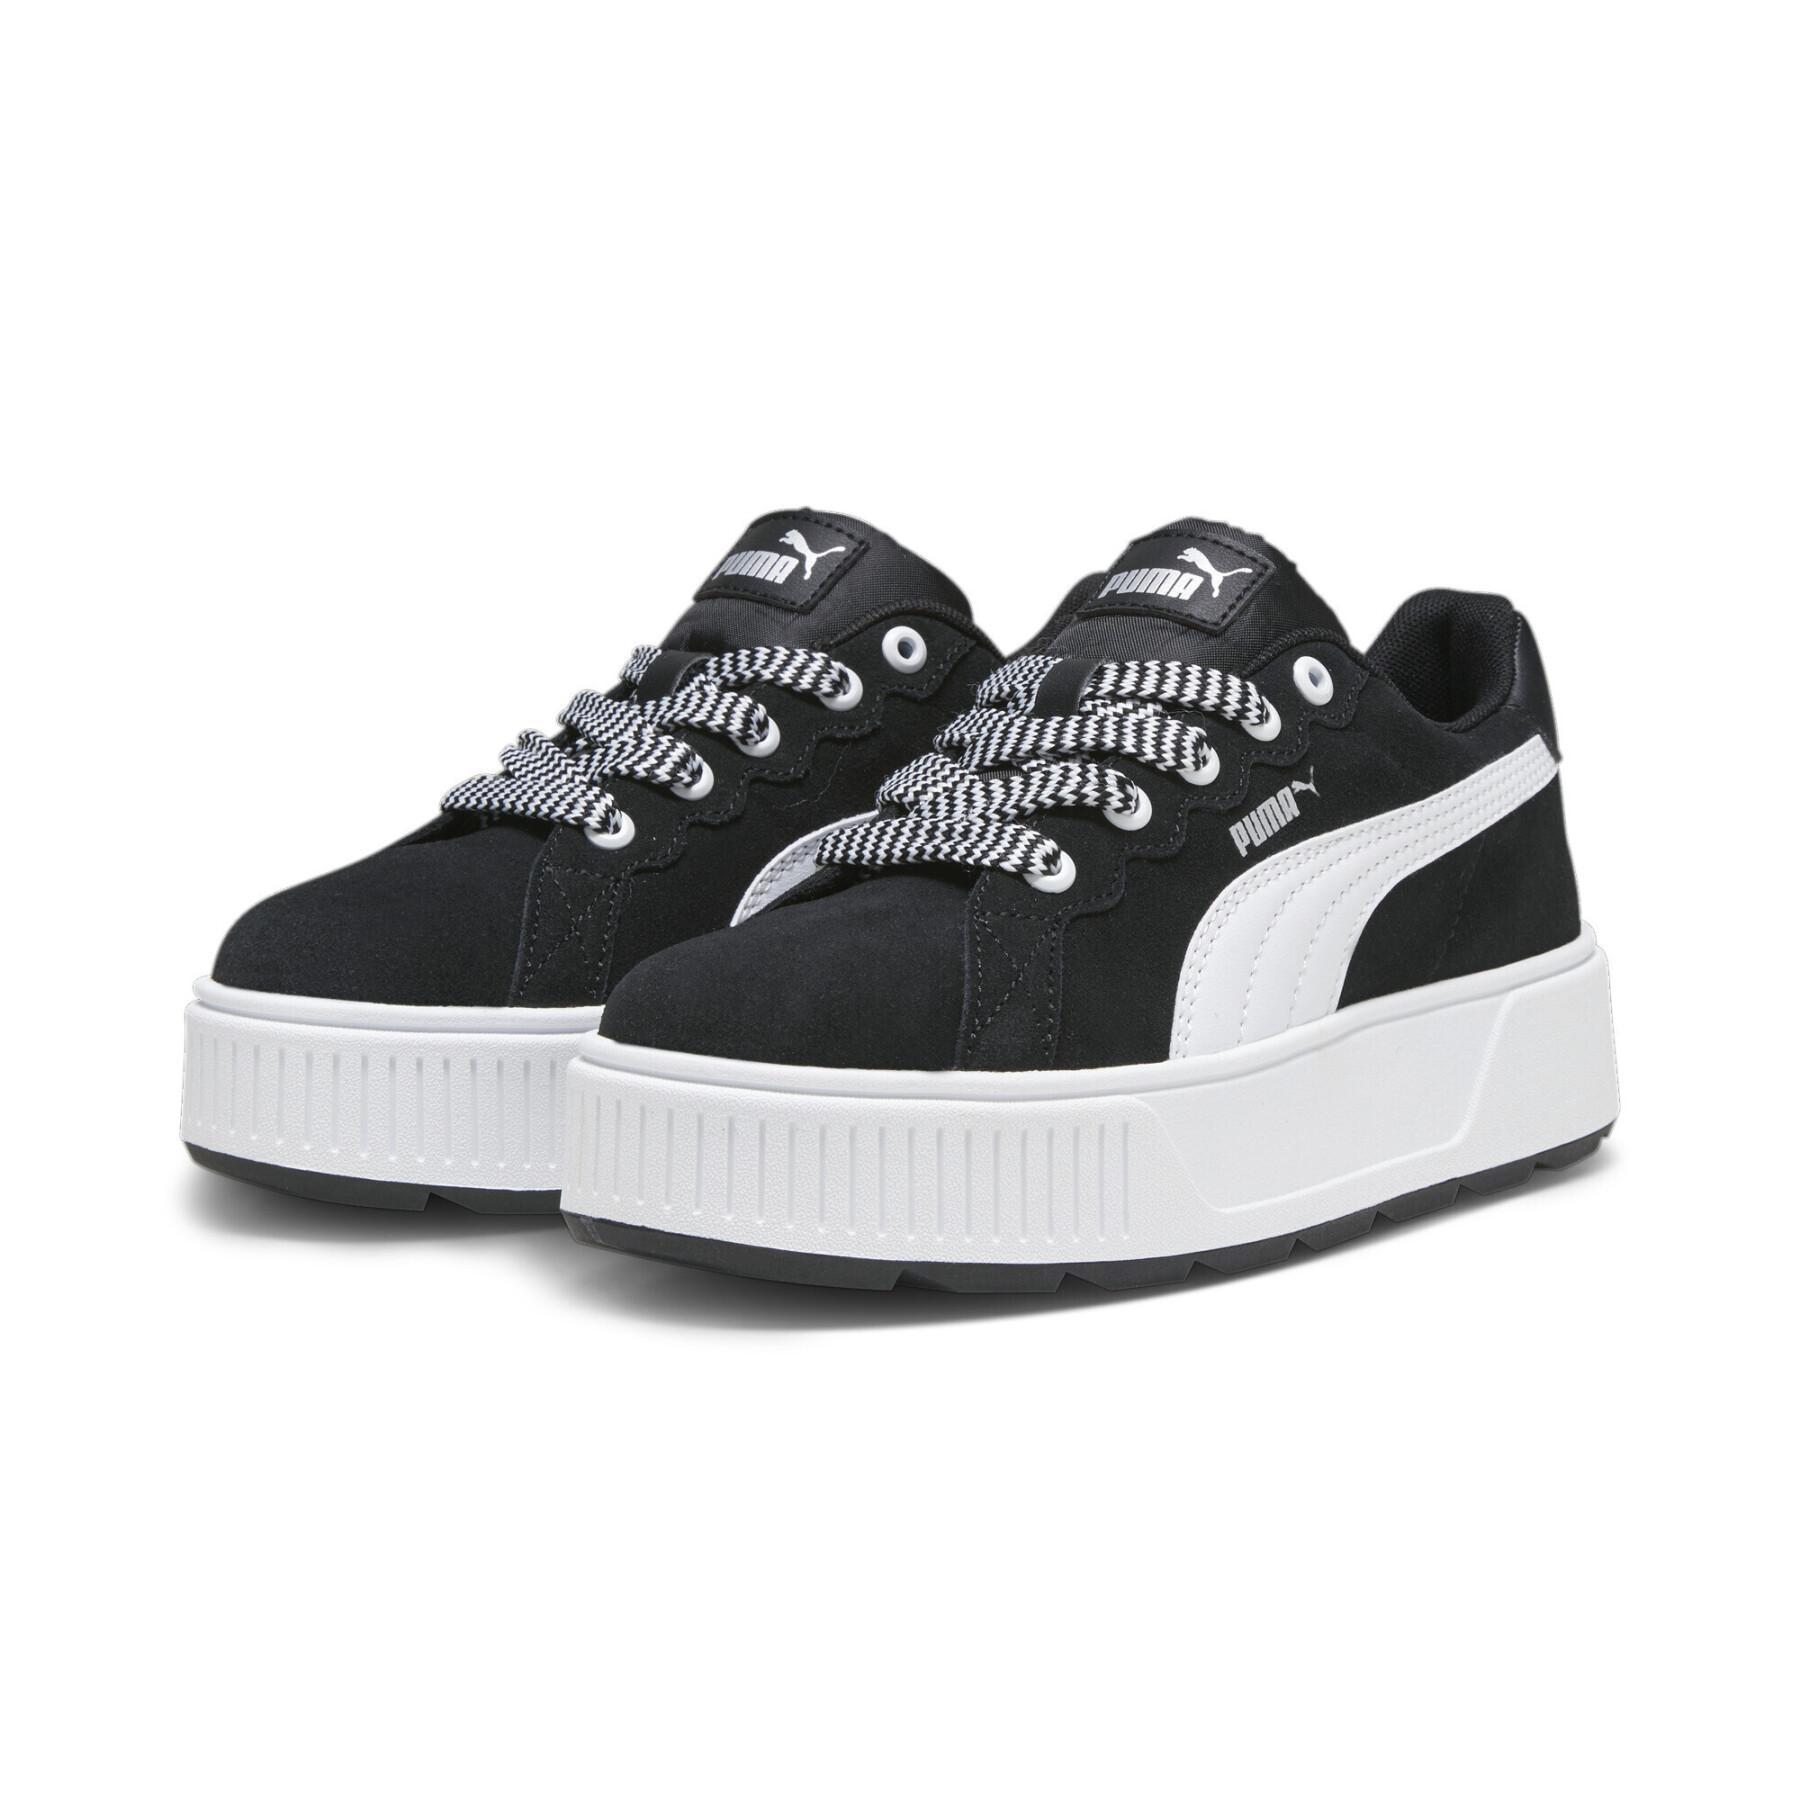 Women's thick lace-up sneakers Puma Karmen